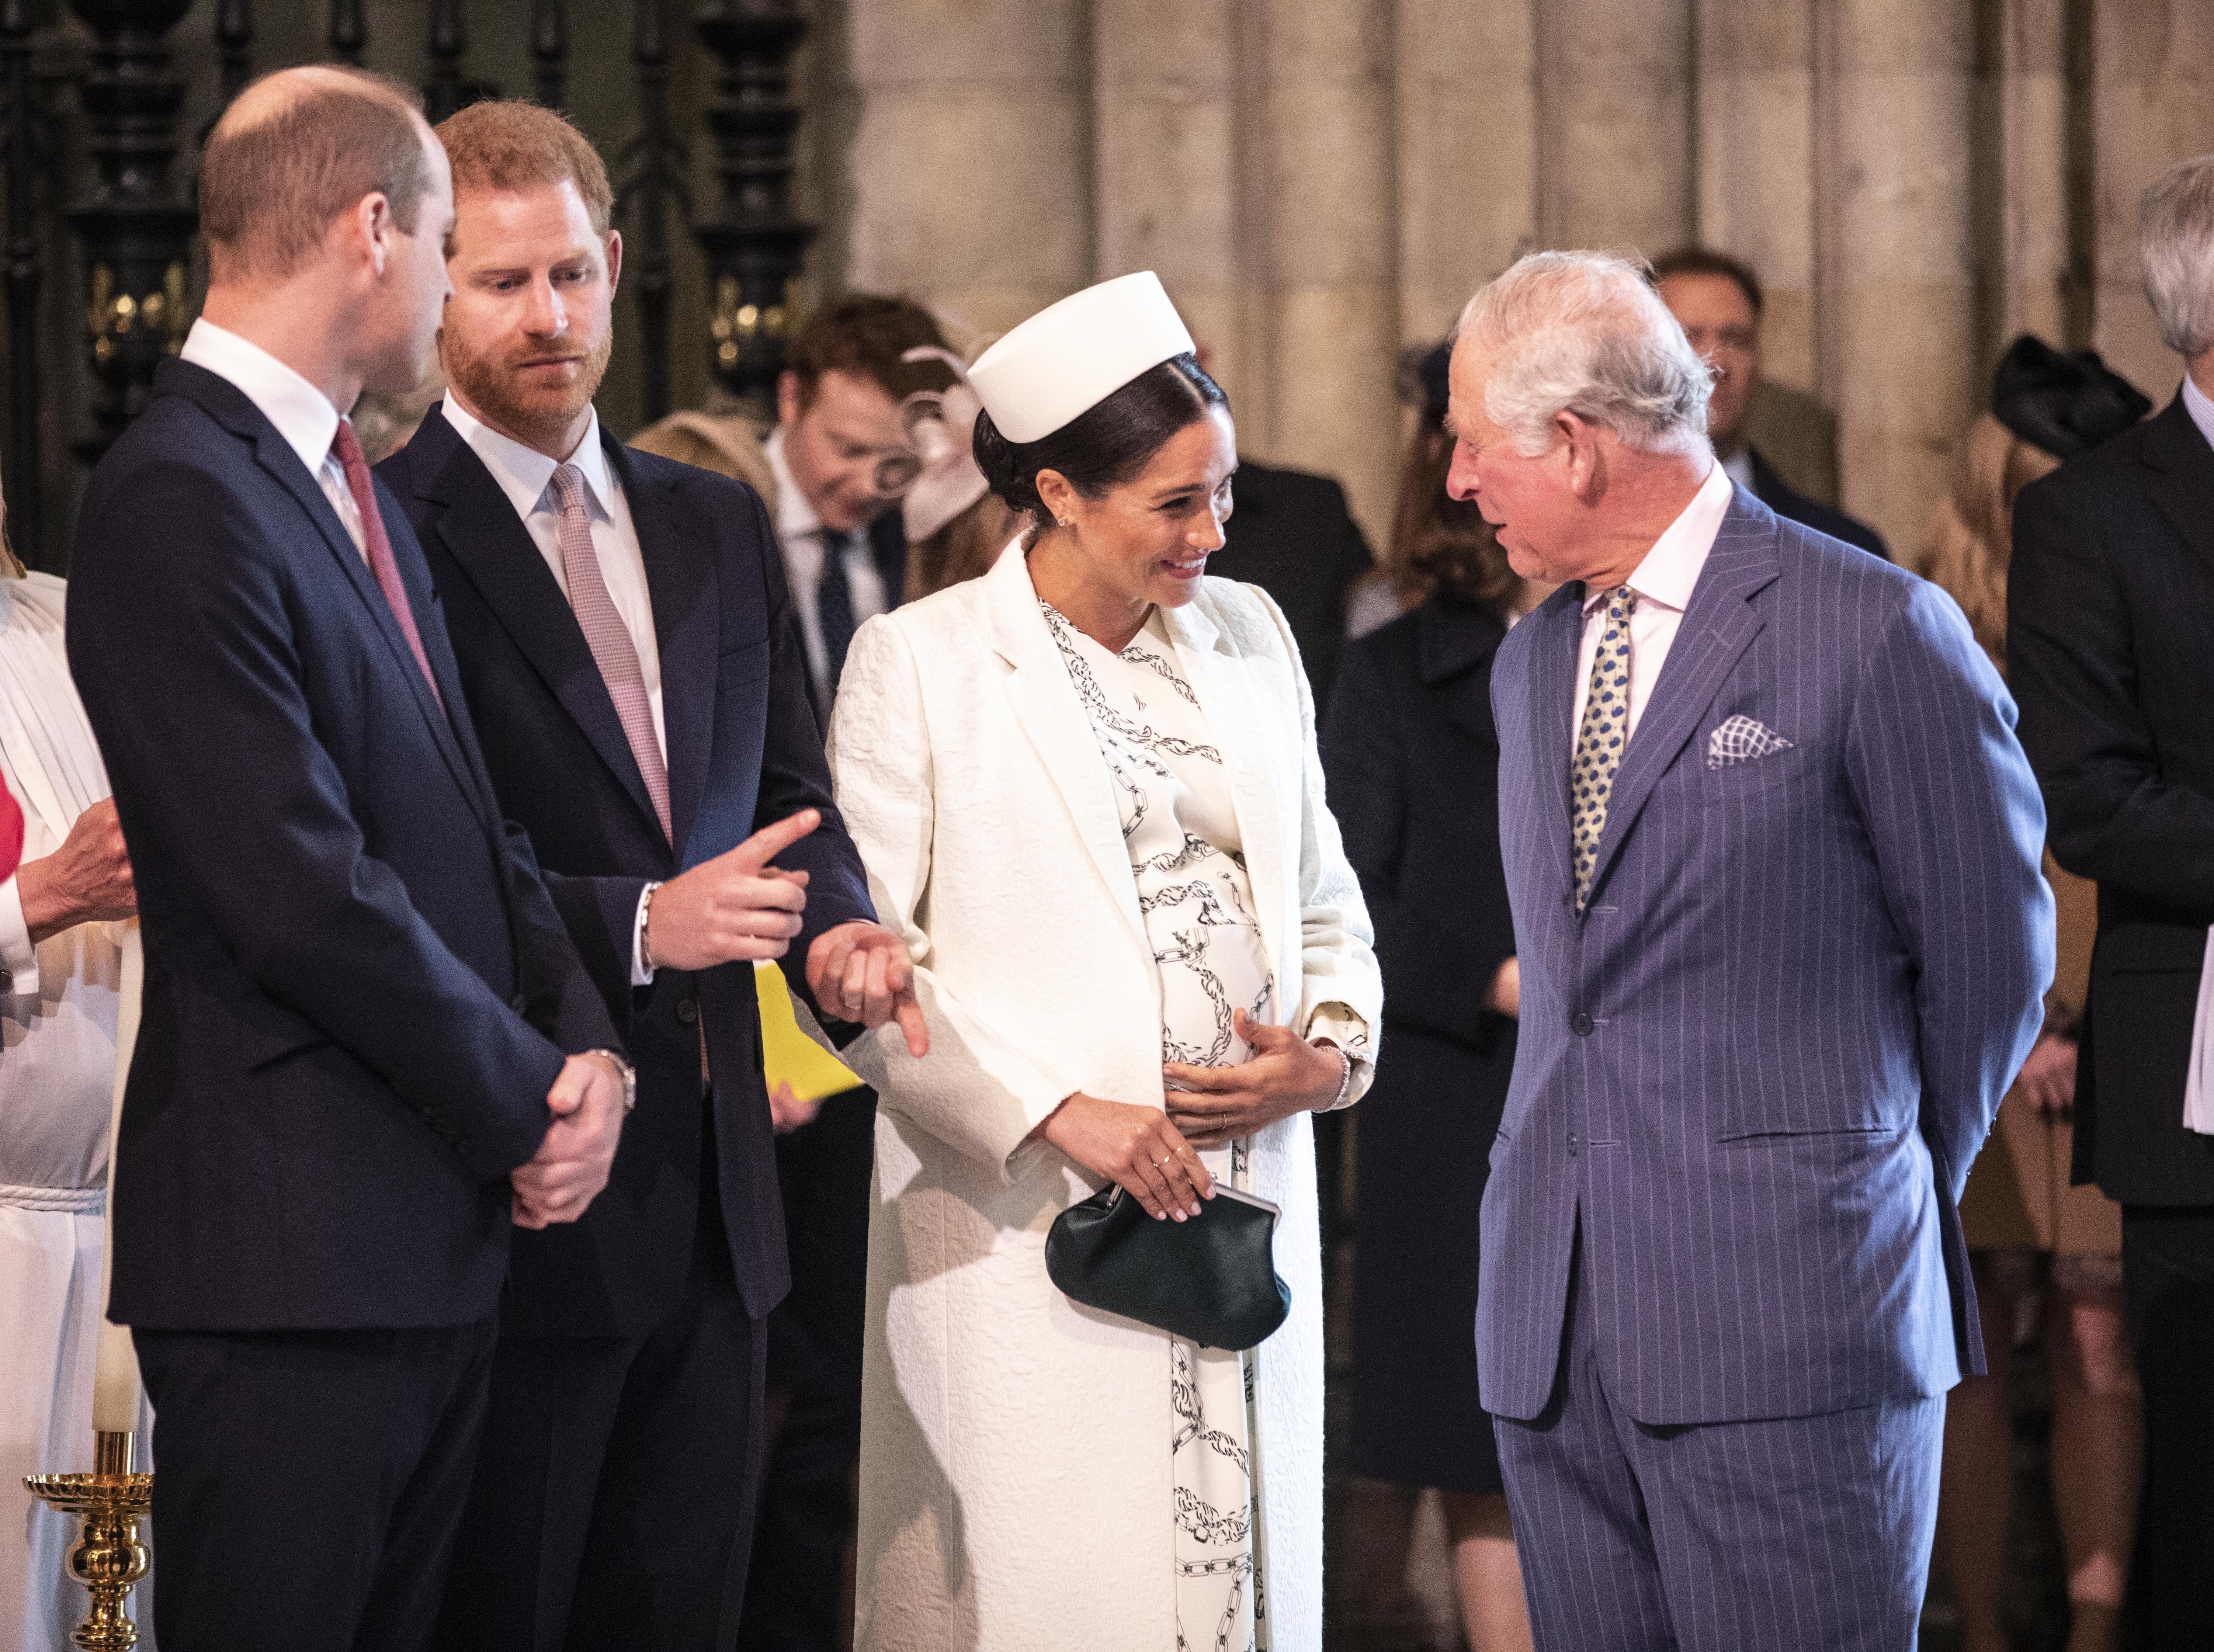 The Prince of Wales, Prince William, Prince Harry and Meghan Markle at the 2019 Commonwealth Day service at Westminster Abbey on March 11, 2019 in London, England. | Photo: Getty Images